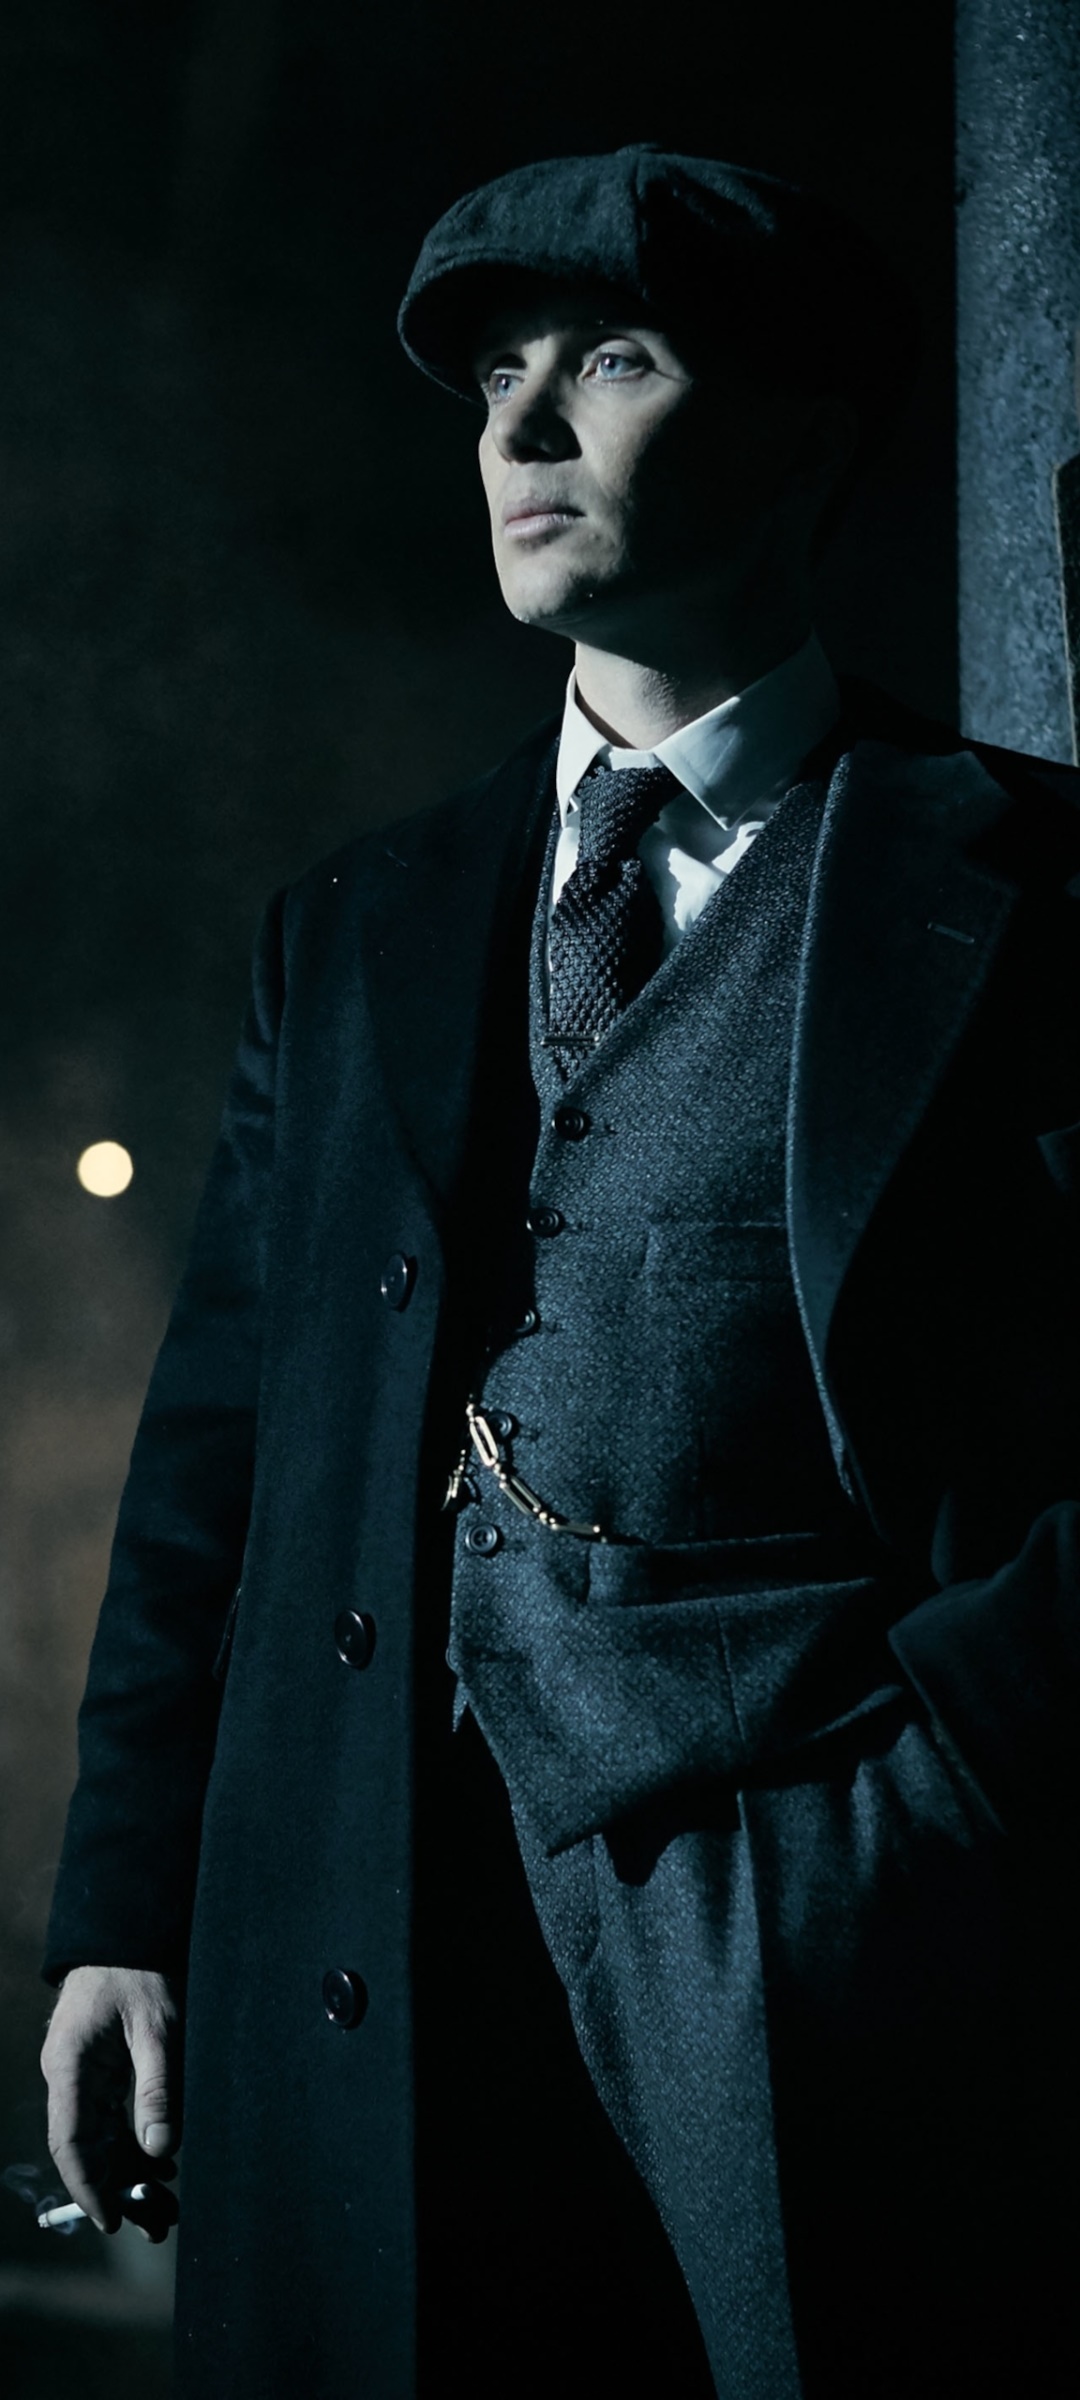 Wallpaper id tv show peaky blinders phone wallpaper cillian murphy thomas shelby x free download